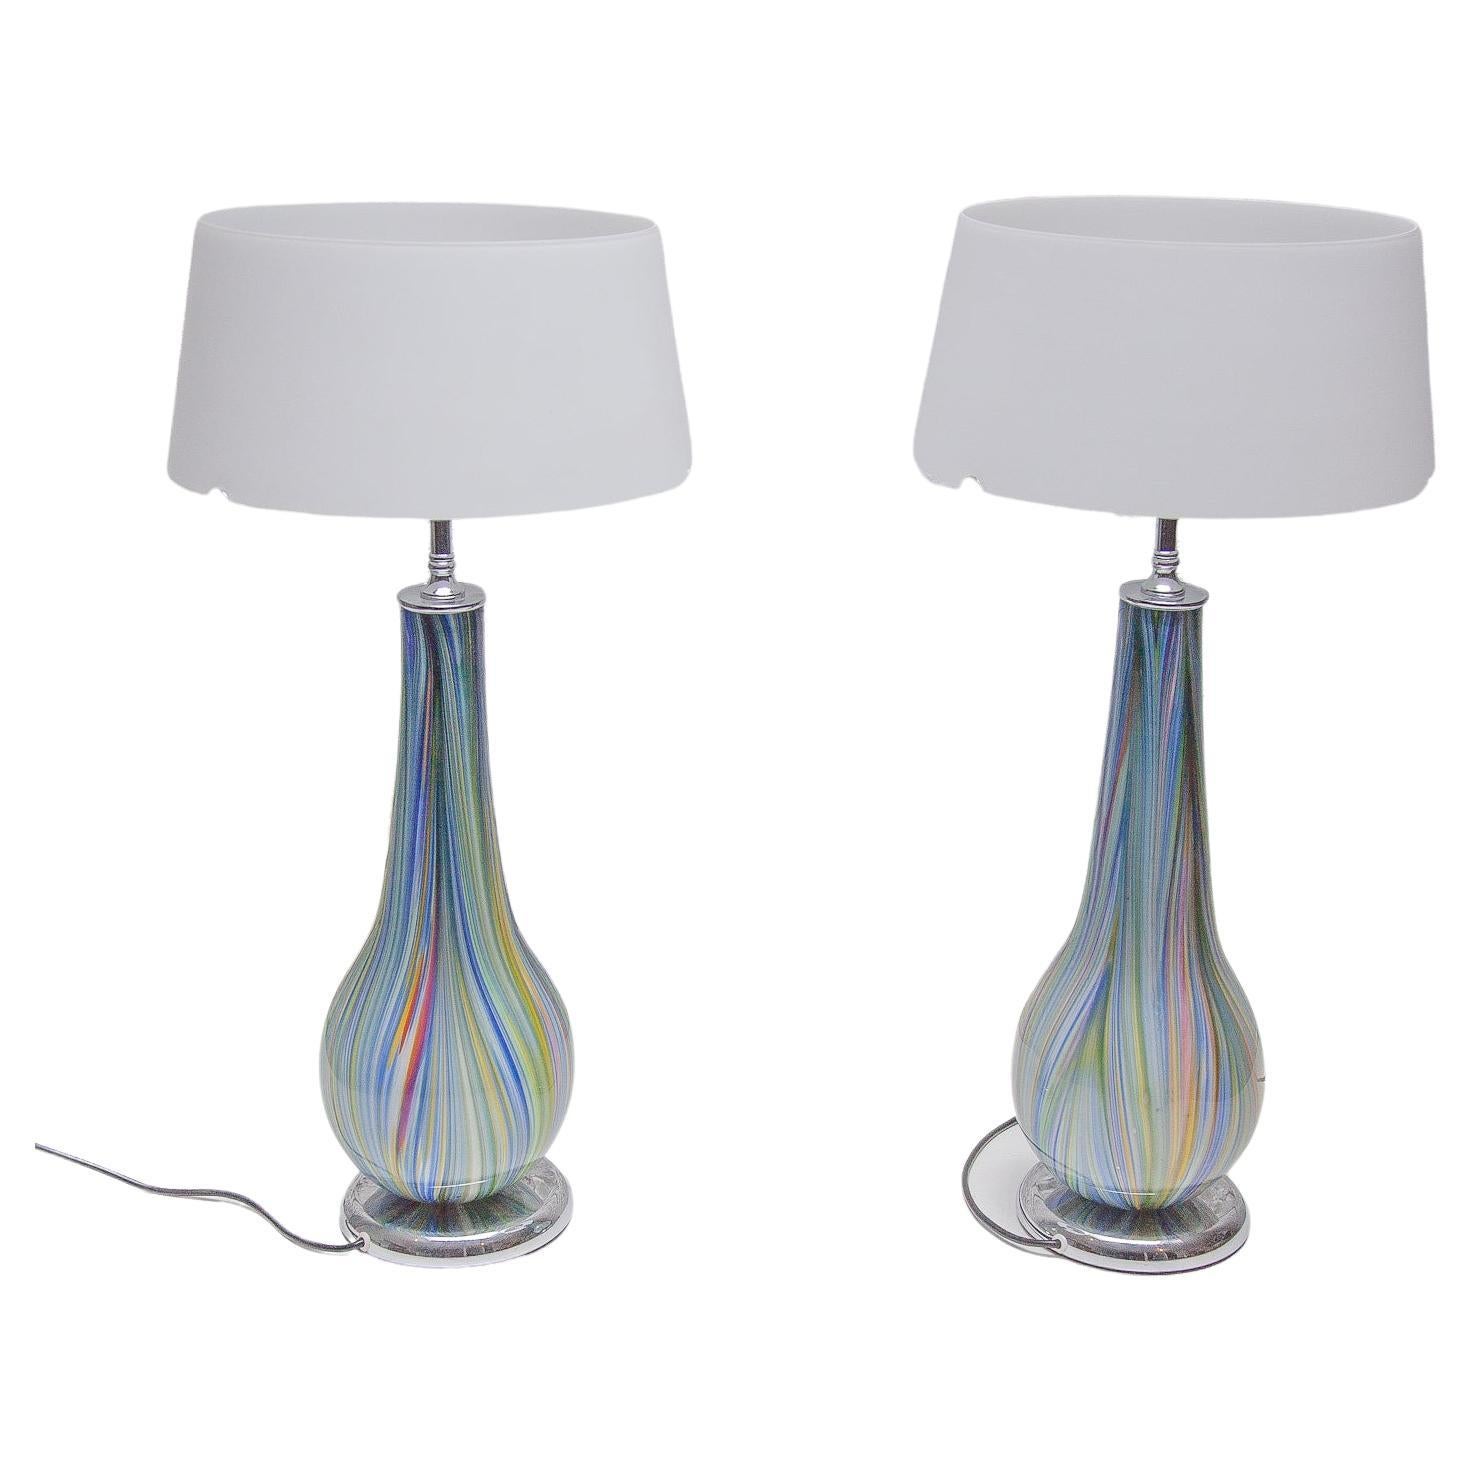 Impressive, 1980s pair of Murano glass table lamps featuring a wonderful mouth blown Millefiori glass vase by Alfredo Barbini. These beautiful lamps have been newly rewired. The chrome hardware has been cleaned and polished. The lamps give an air of